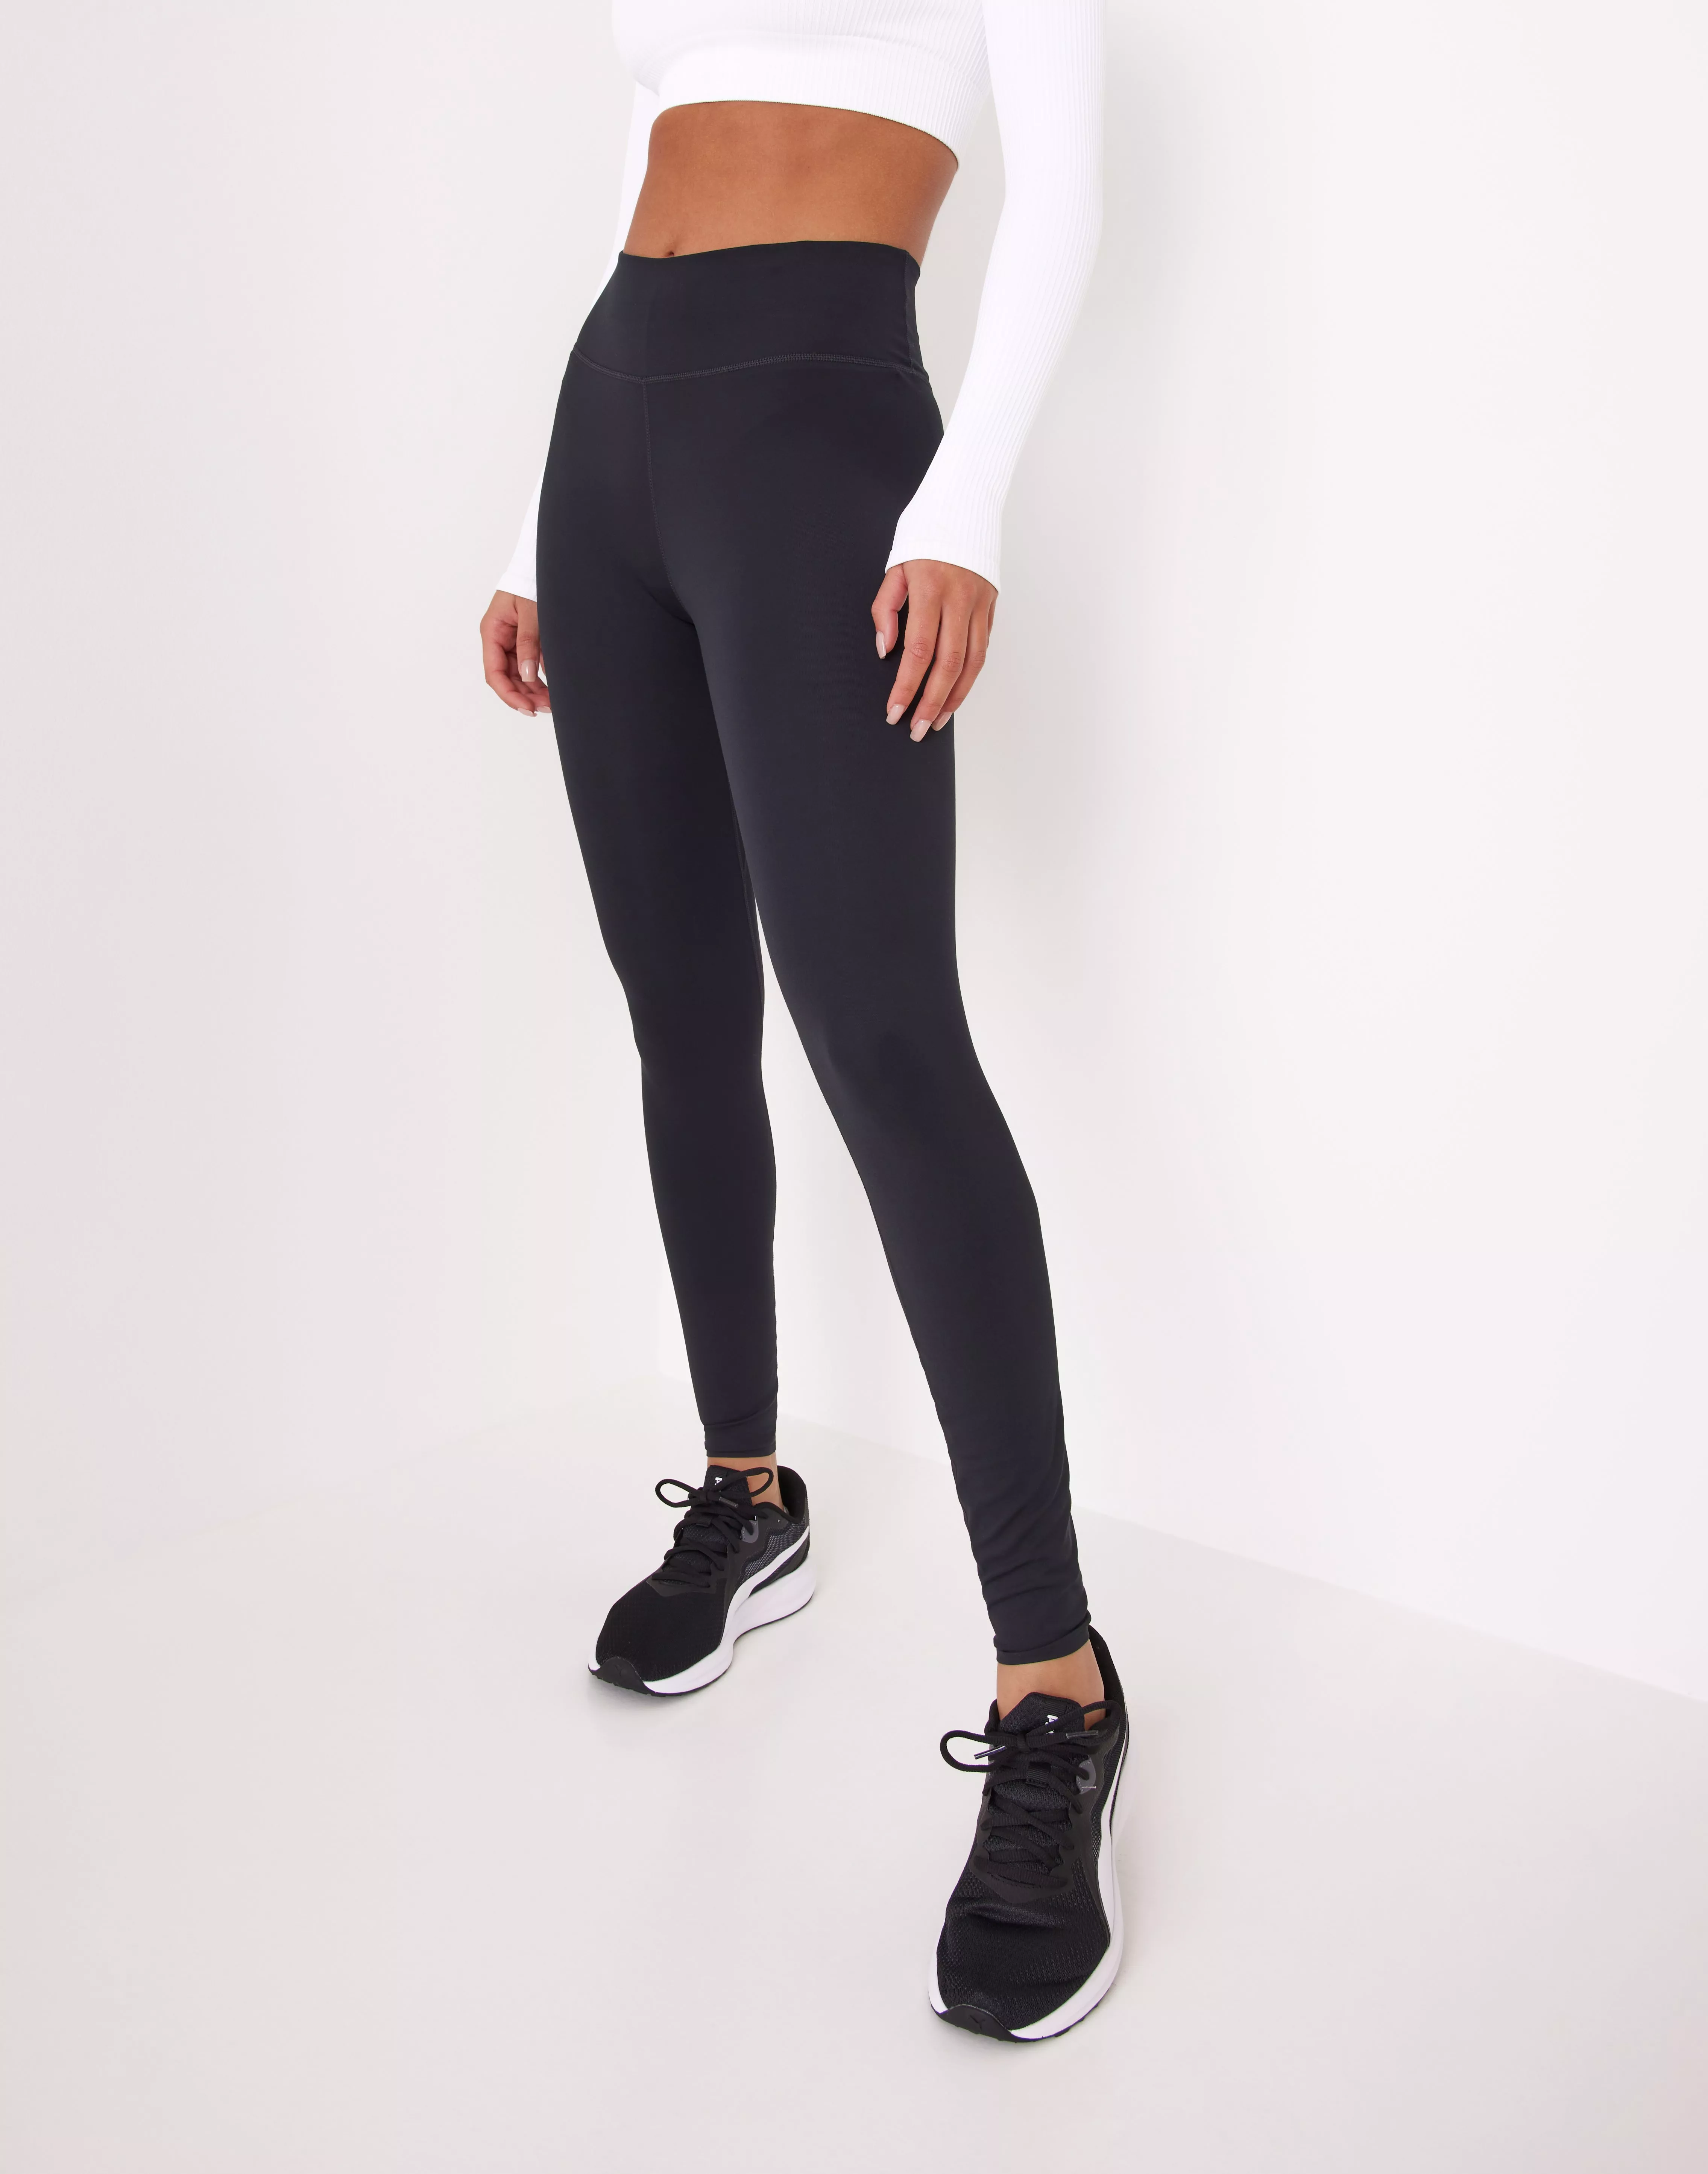 W NIKE ONE LUXE MR TIGHT